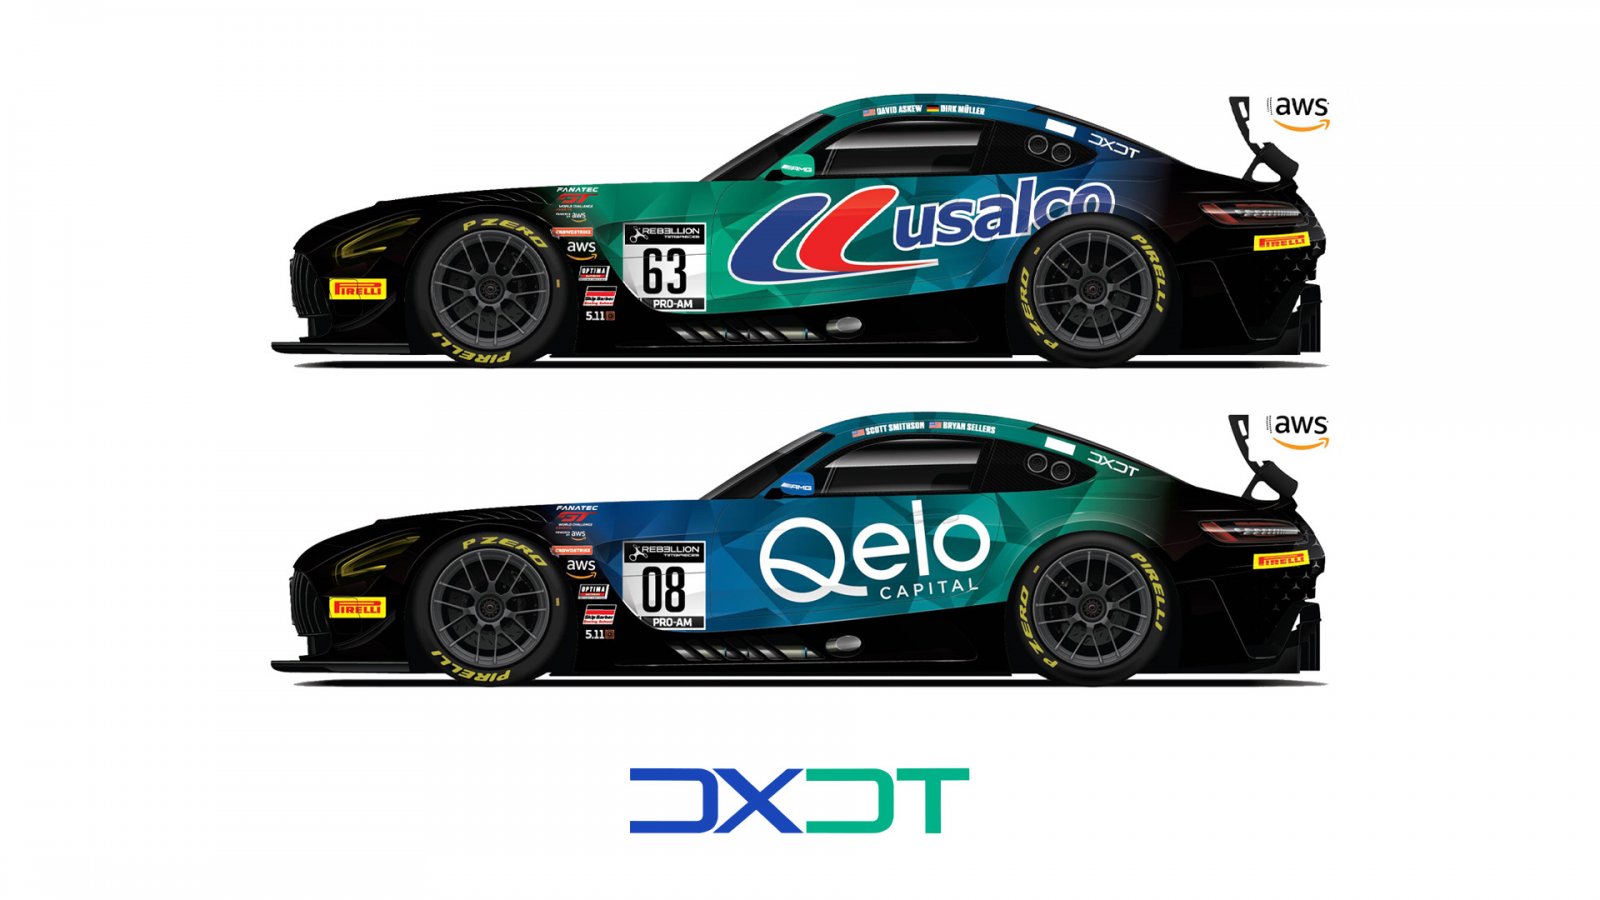 DXDT Racing Gears Up for 2022 Fanatec GT World Challenge America powered by AWS Season